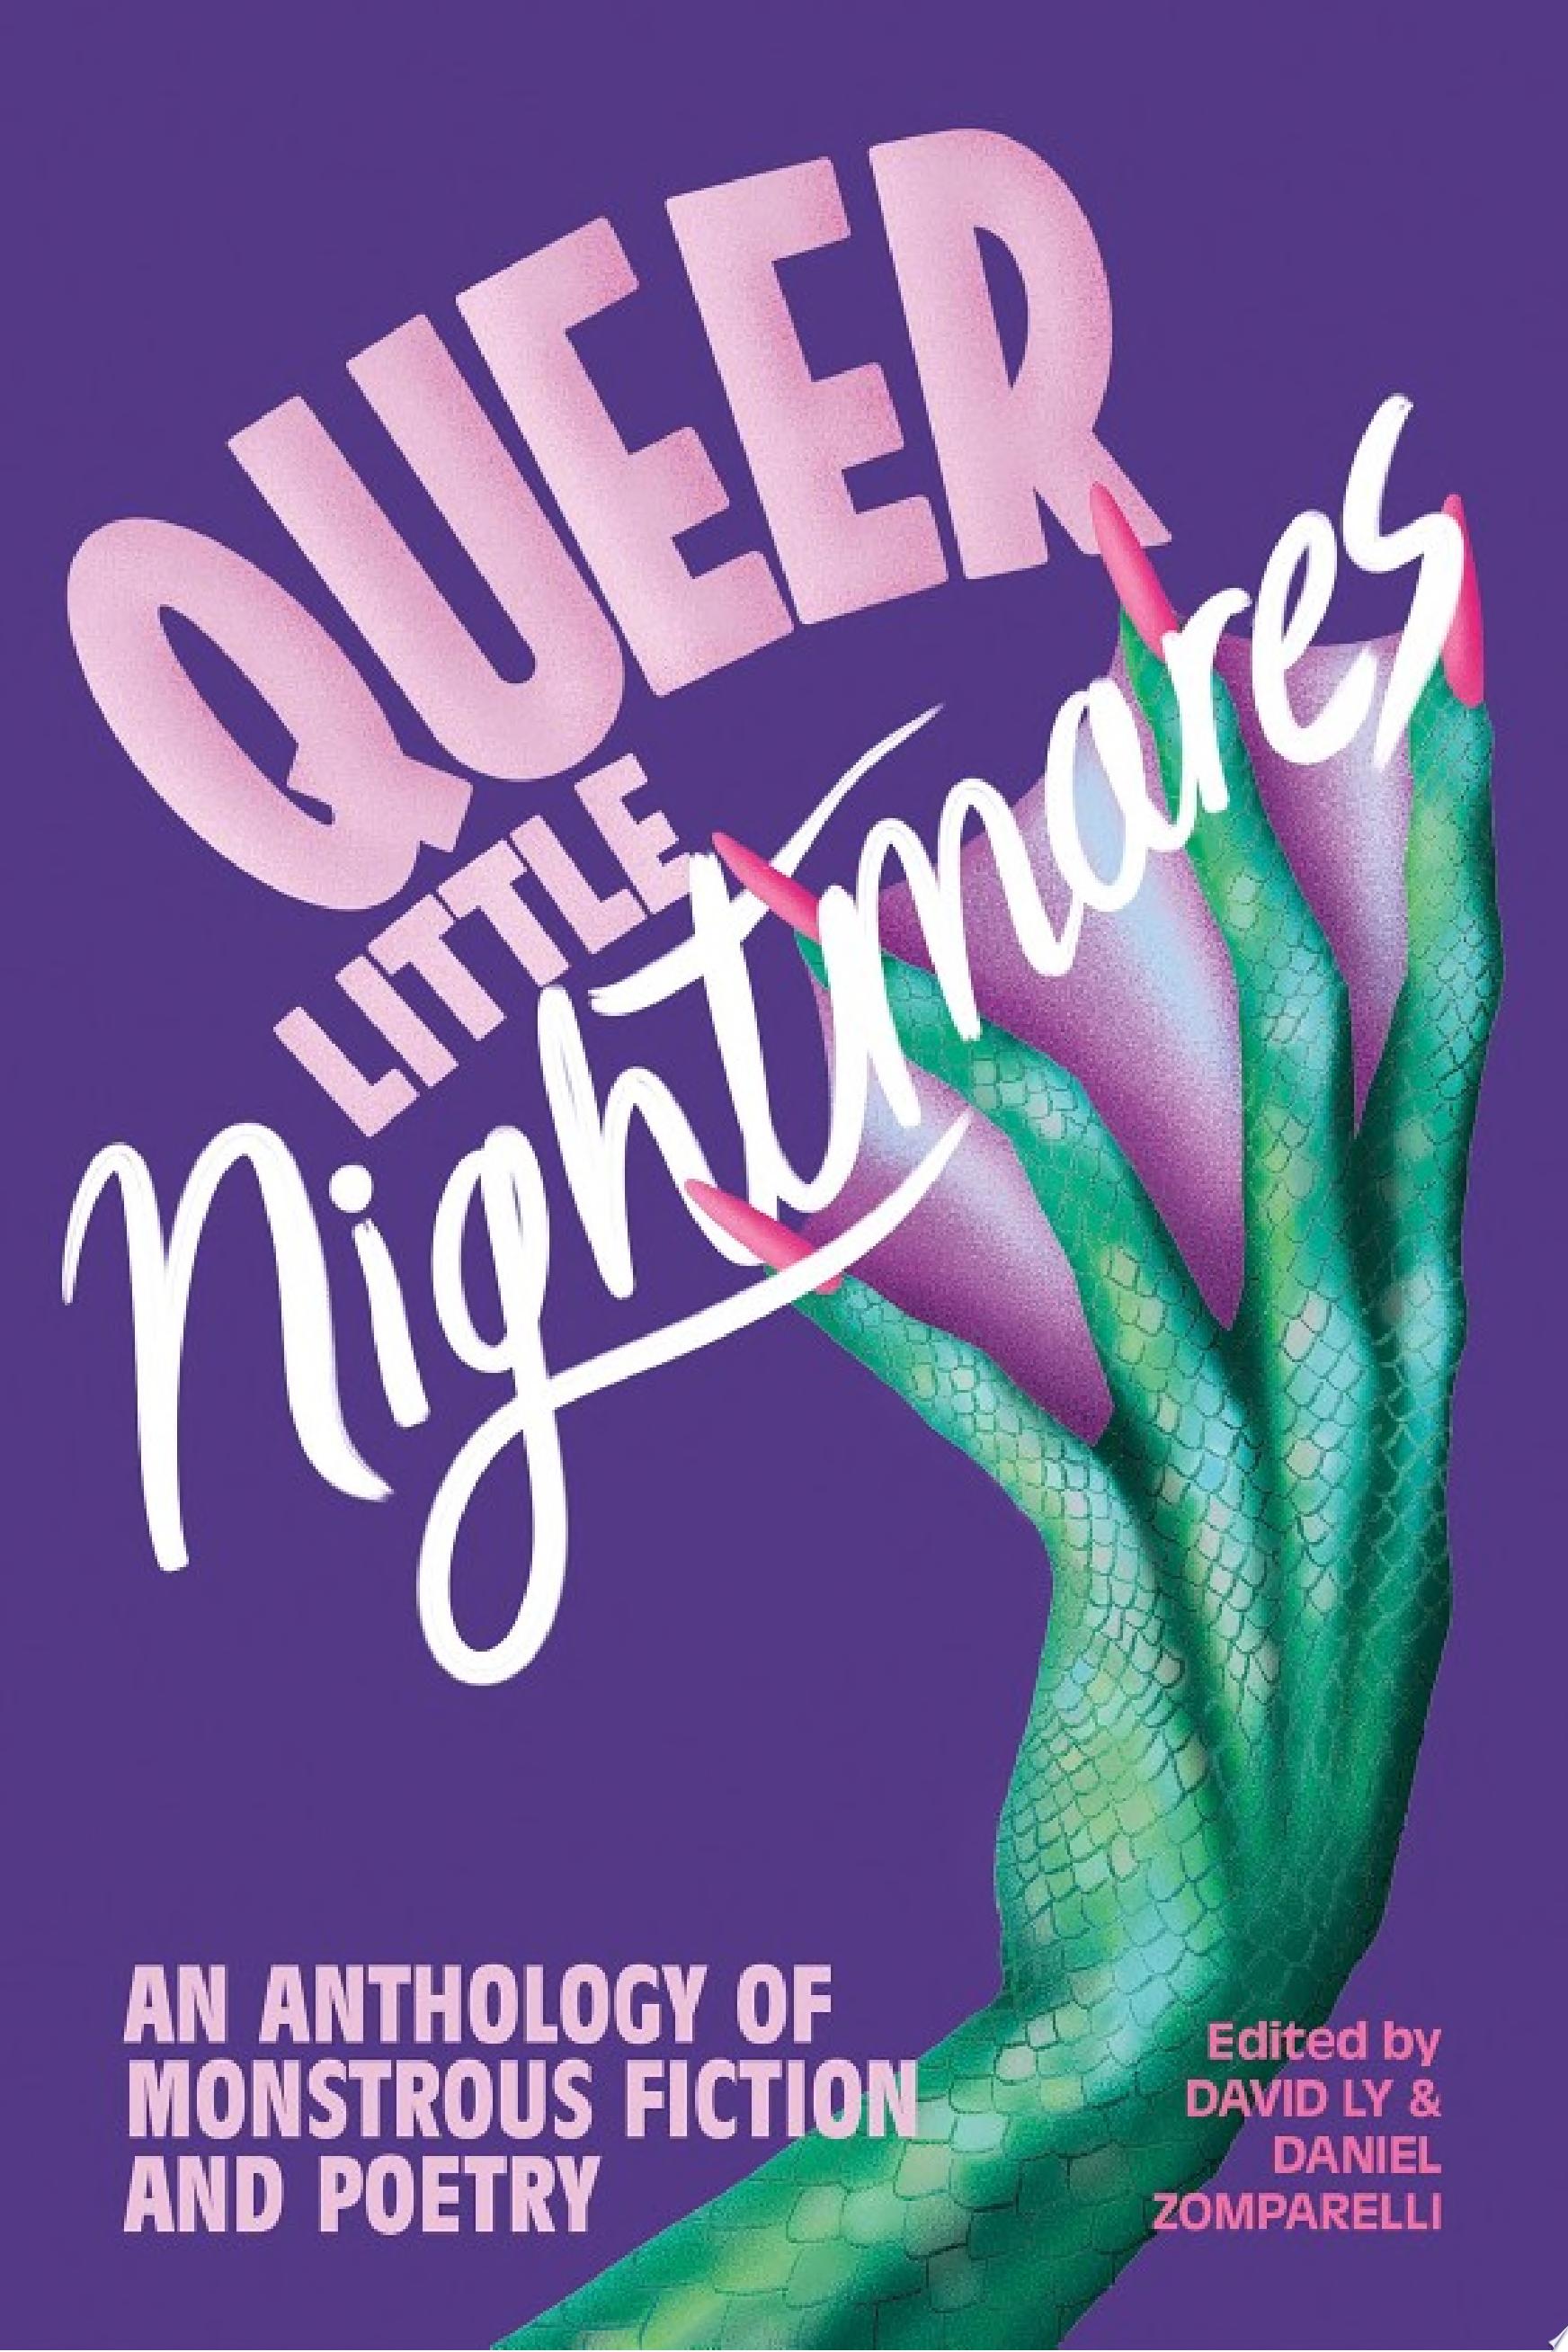 Image for "Queer Little Nightmares"